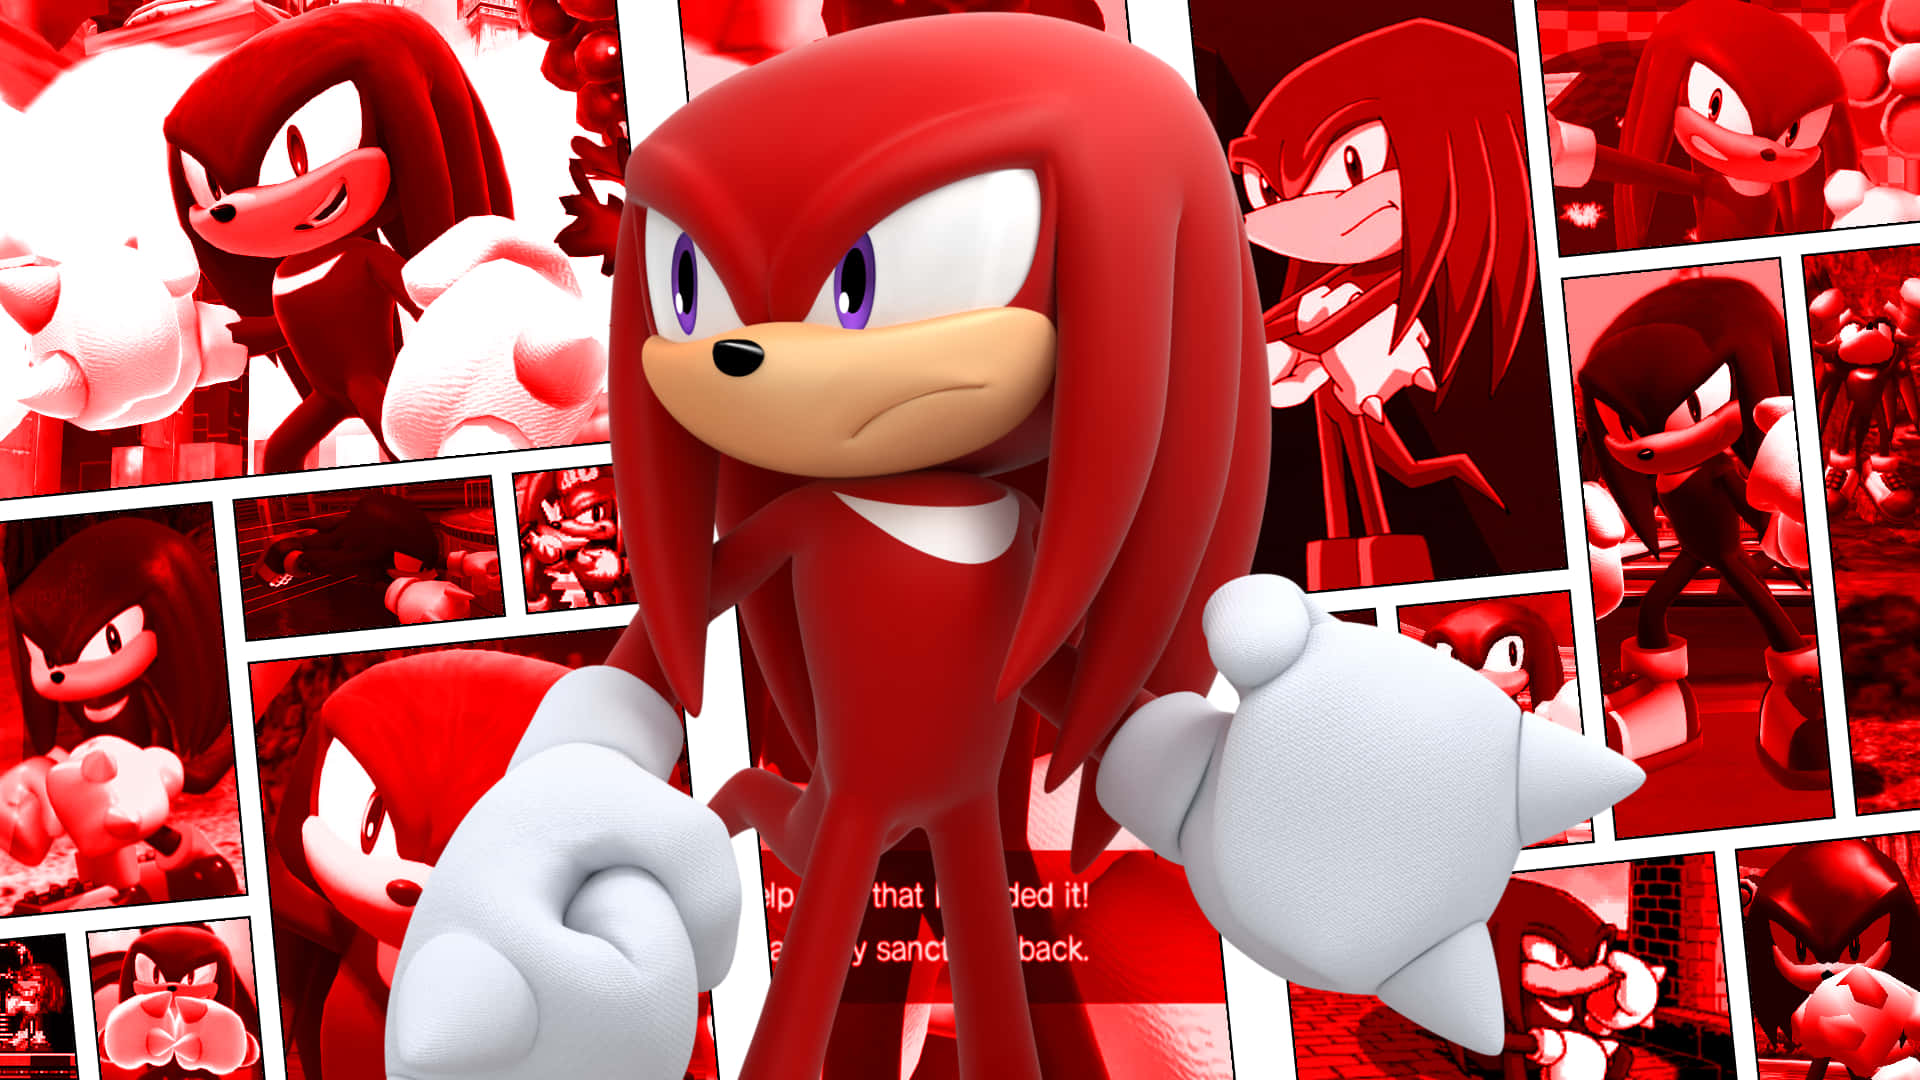 Channel Your Inner Power With Knuckles! Background